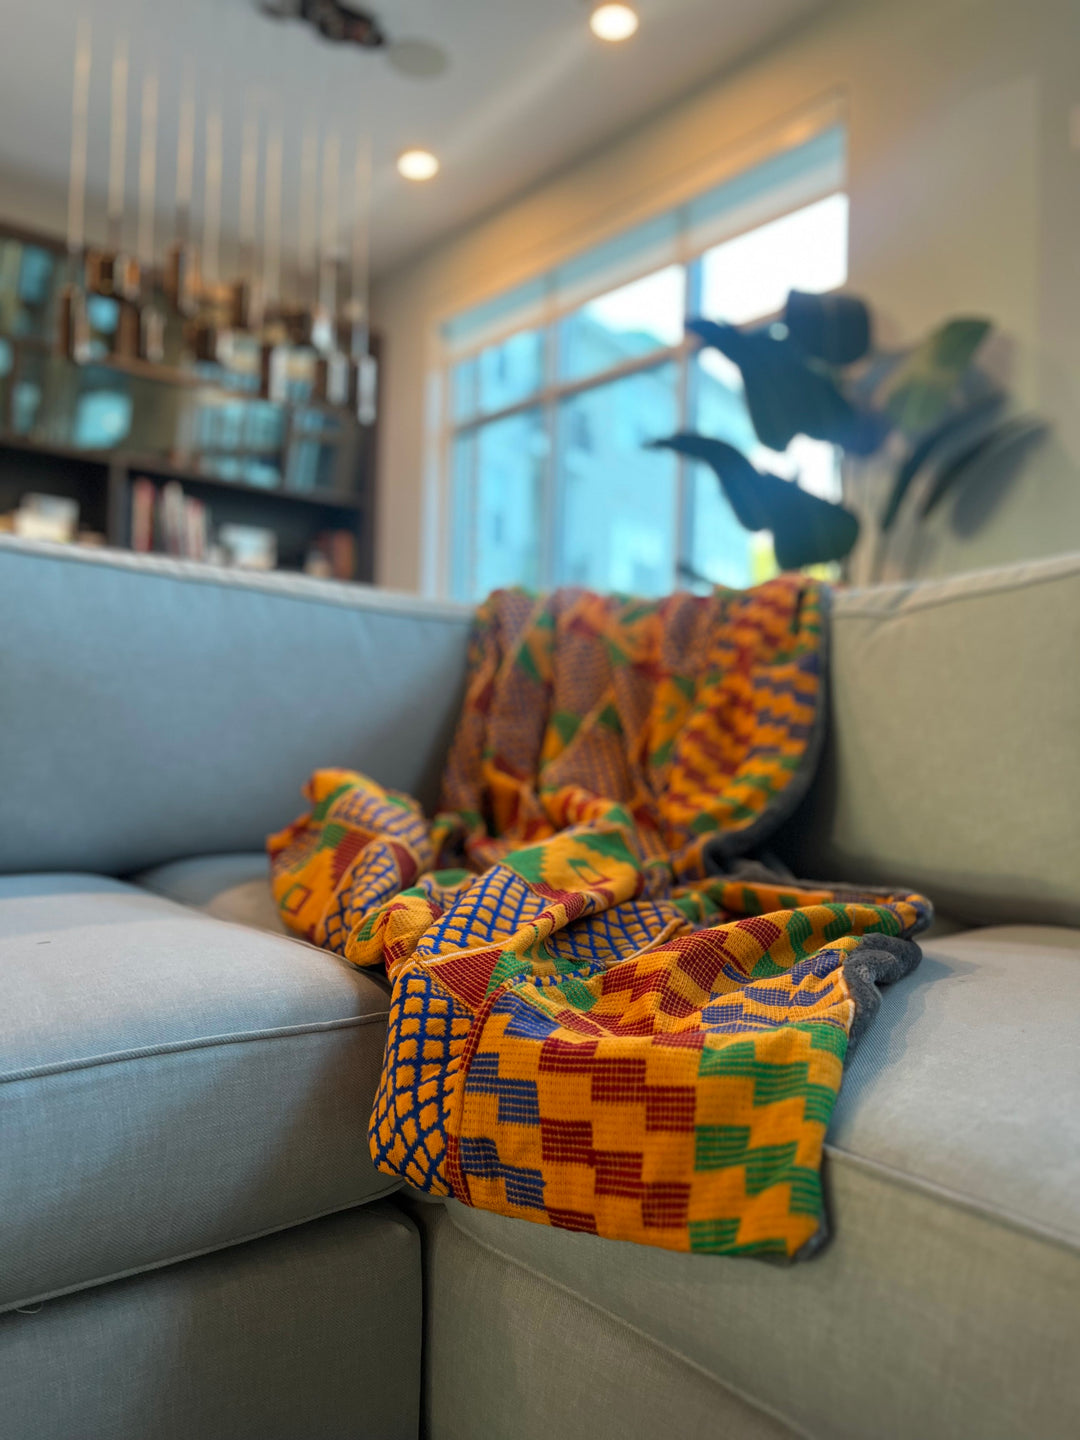 Introducing our extraordinary handmade Kente throw blanket, a true masterpiece of African artistry and cultural heritage